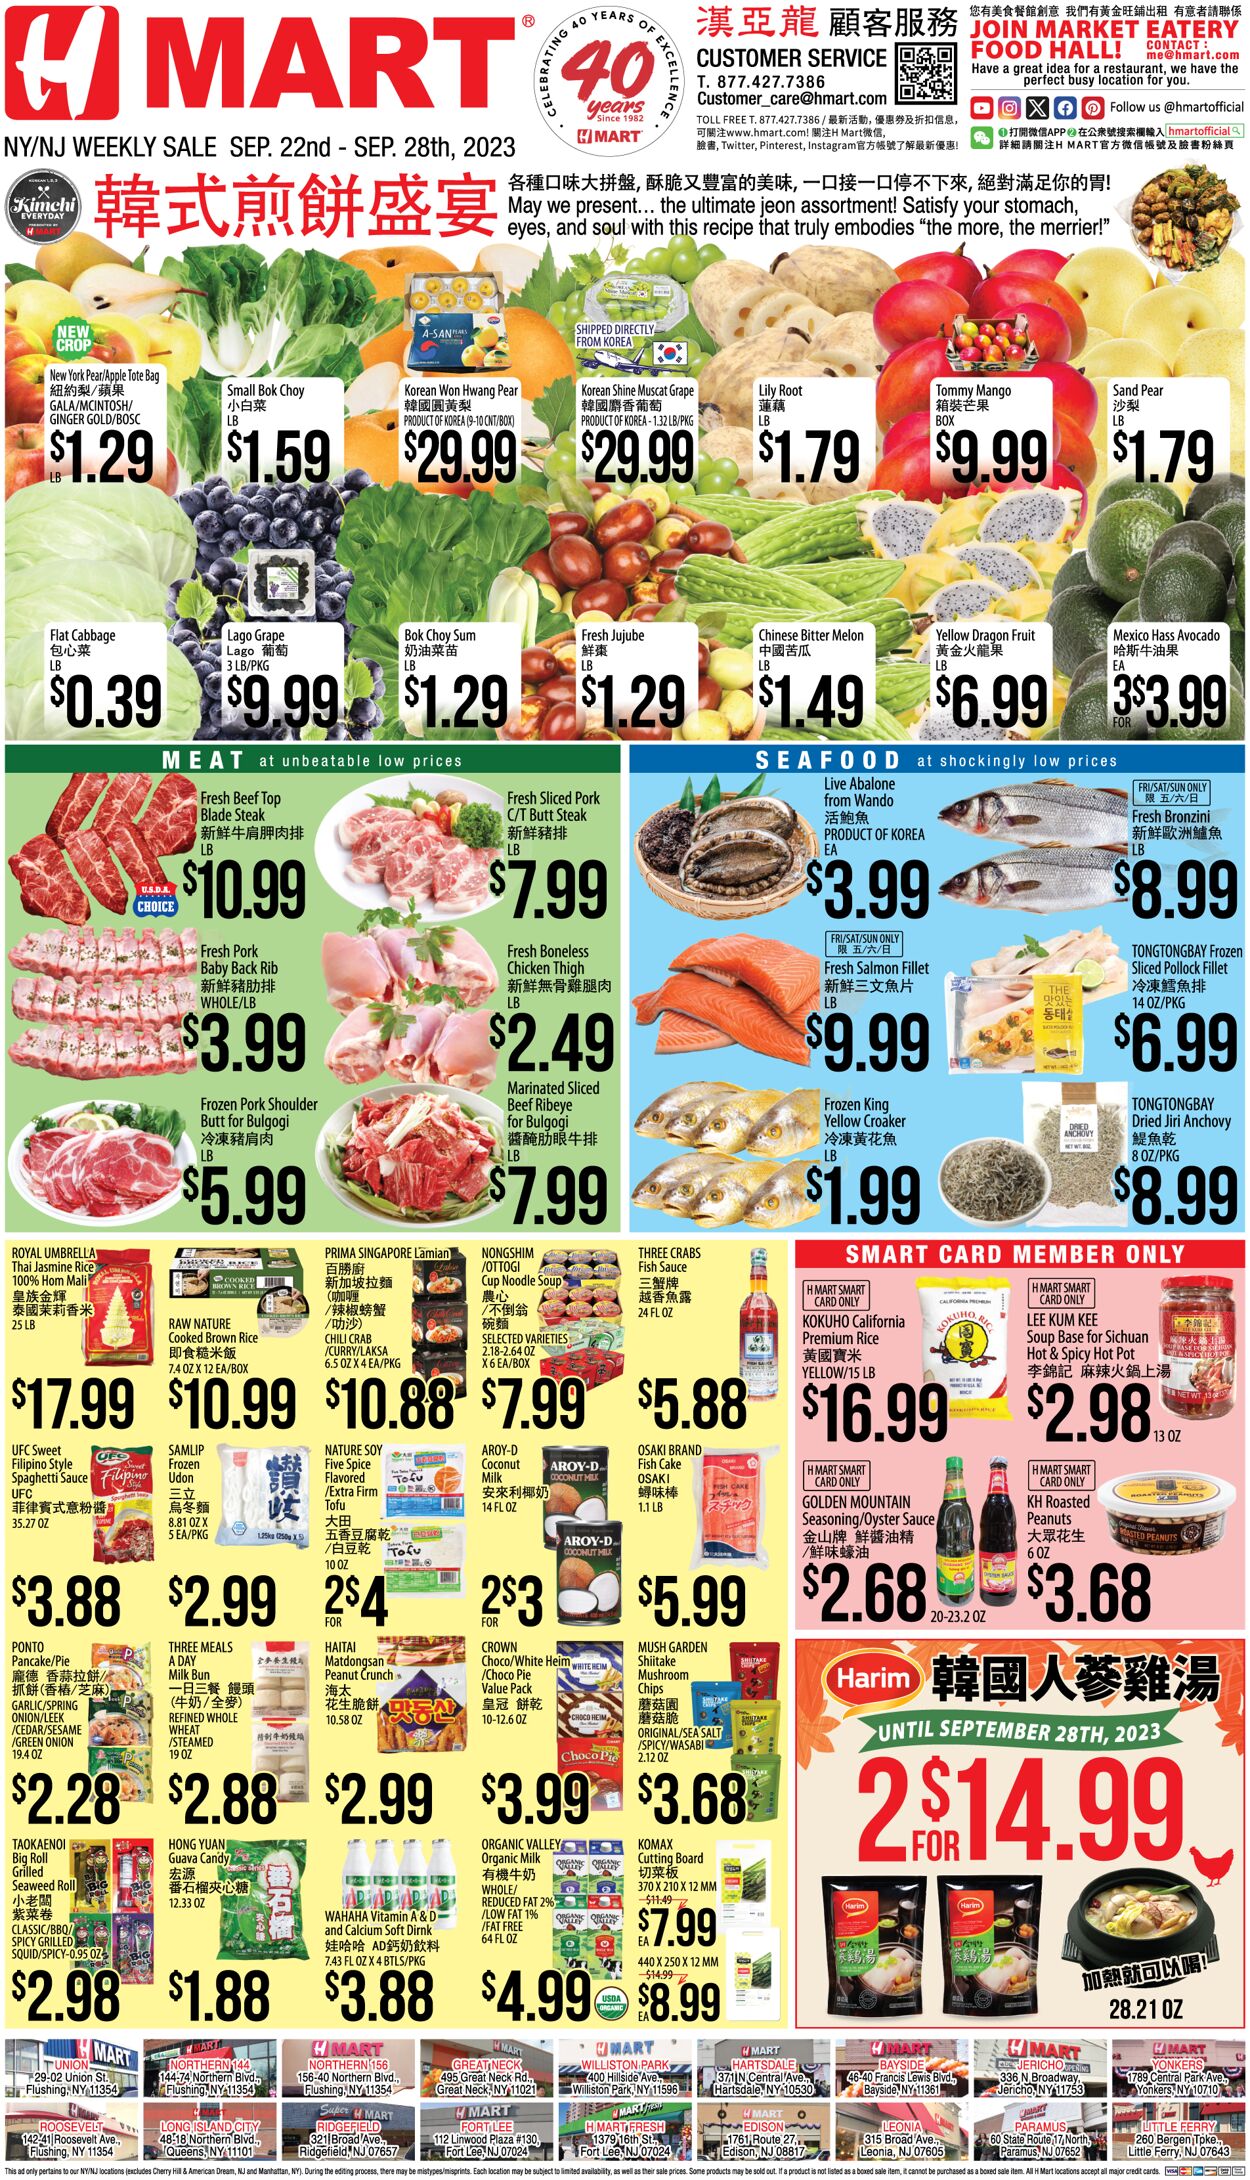 Weekly ad H-Mart - CHINESE(NJ) Sep 29, 2023 - Oct 5, 2023